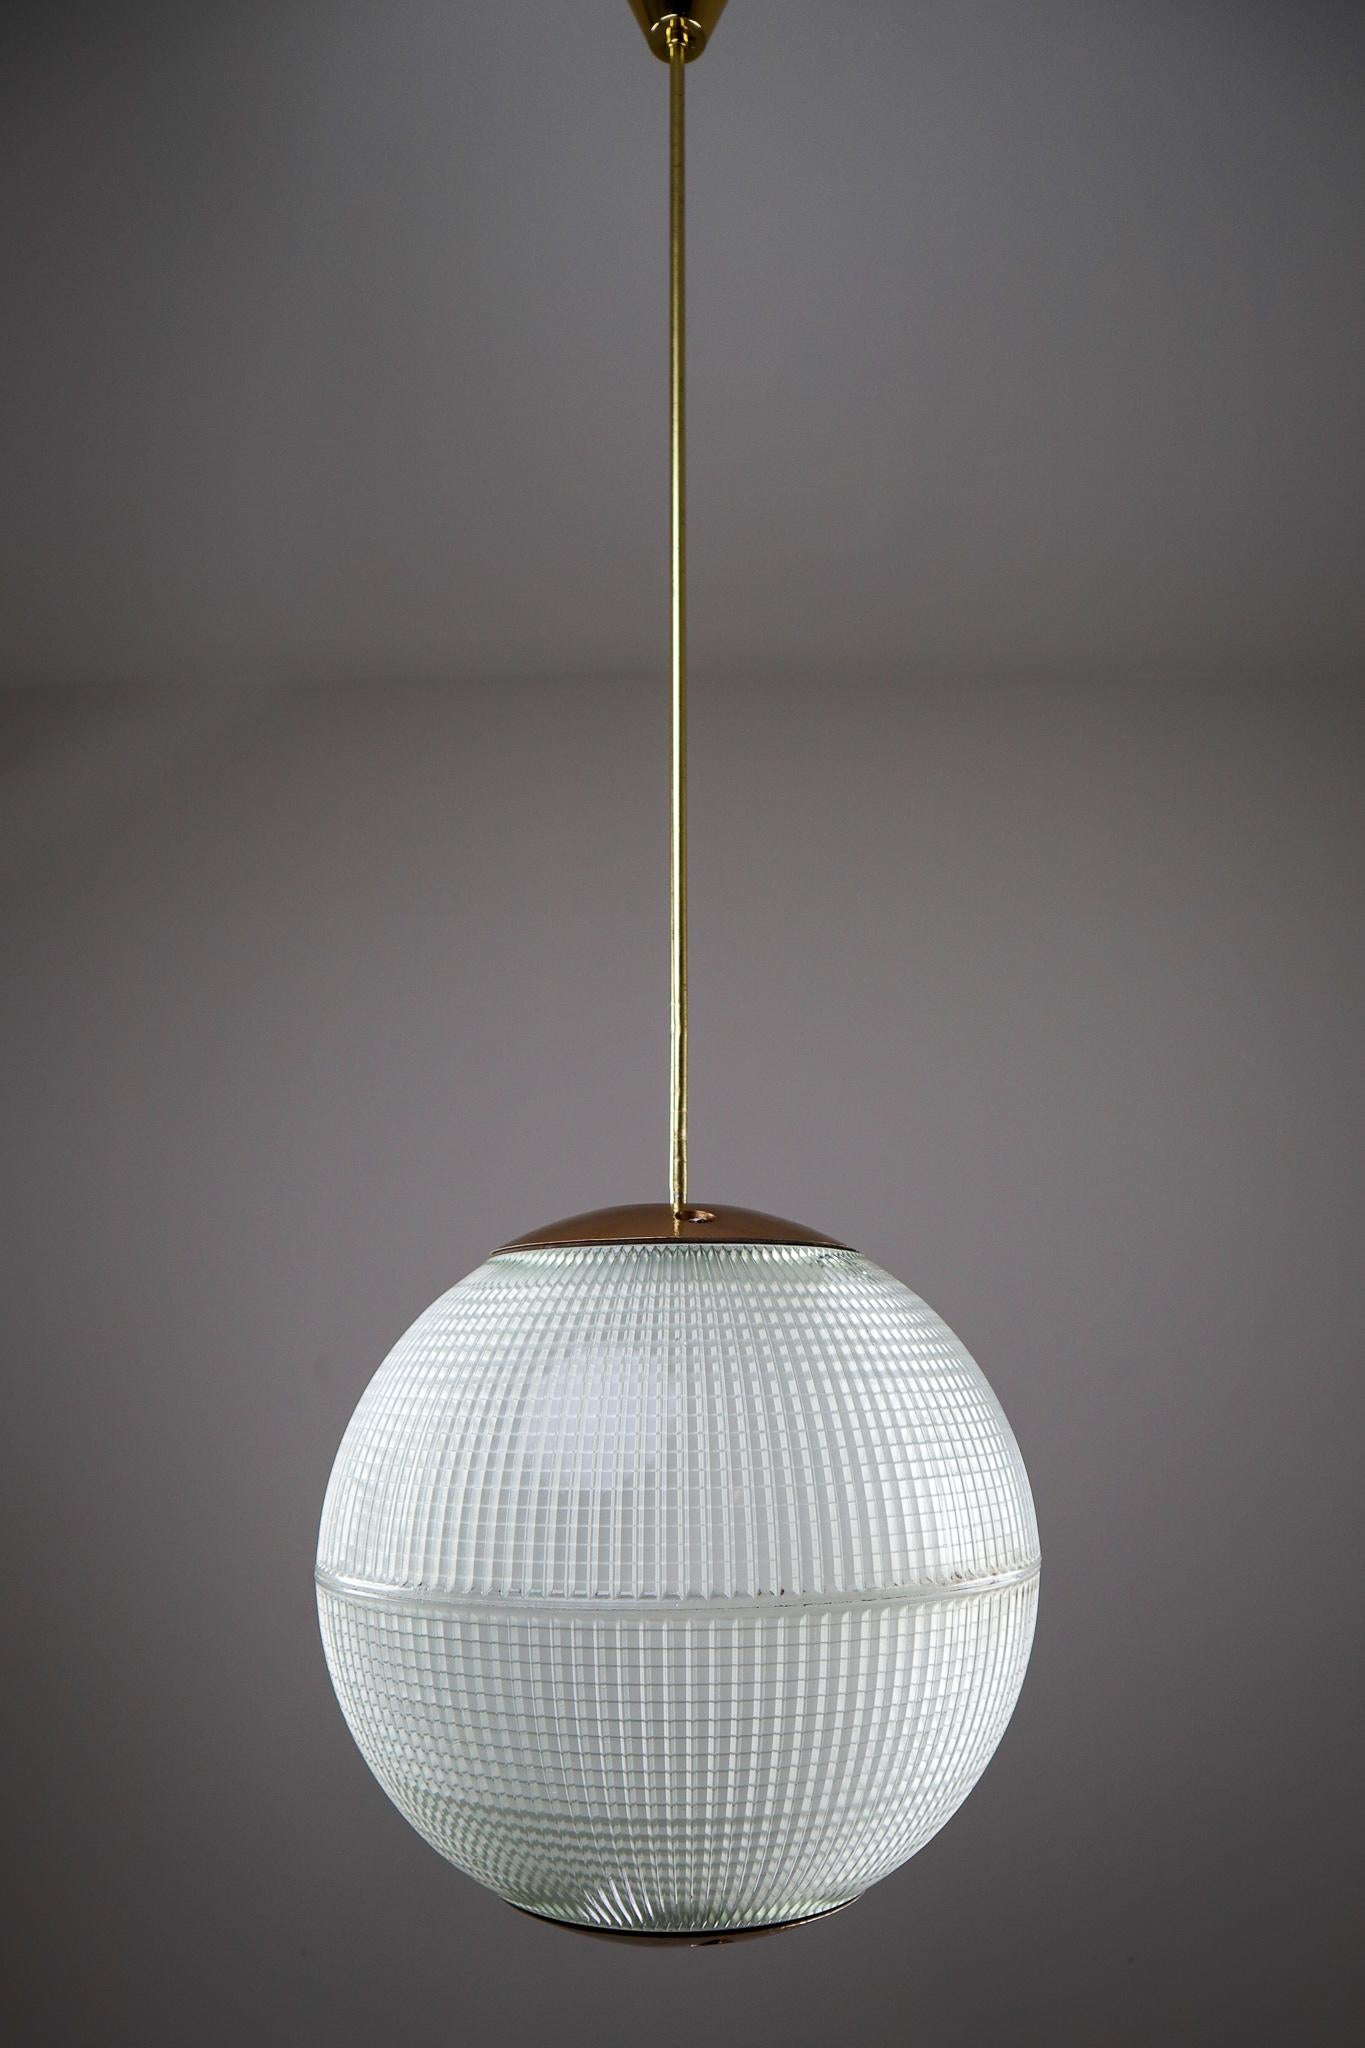 This is an 1960s Paris globe Holophane street light from Paris, France now turned into a pendant light with brass rod and brass colored details. The hallmark of Holophane luminaries, or lighting fixtures, is the borosilicate glass reflector /